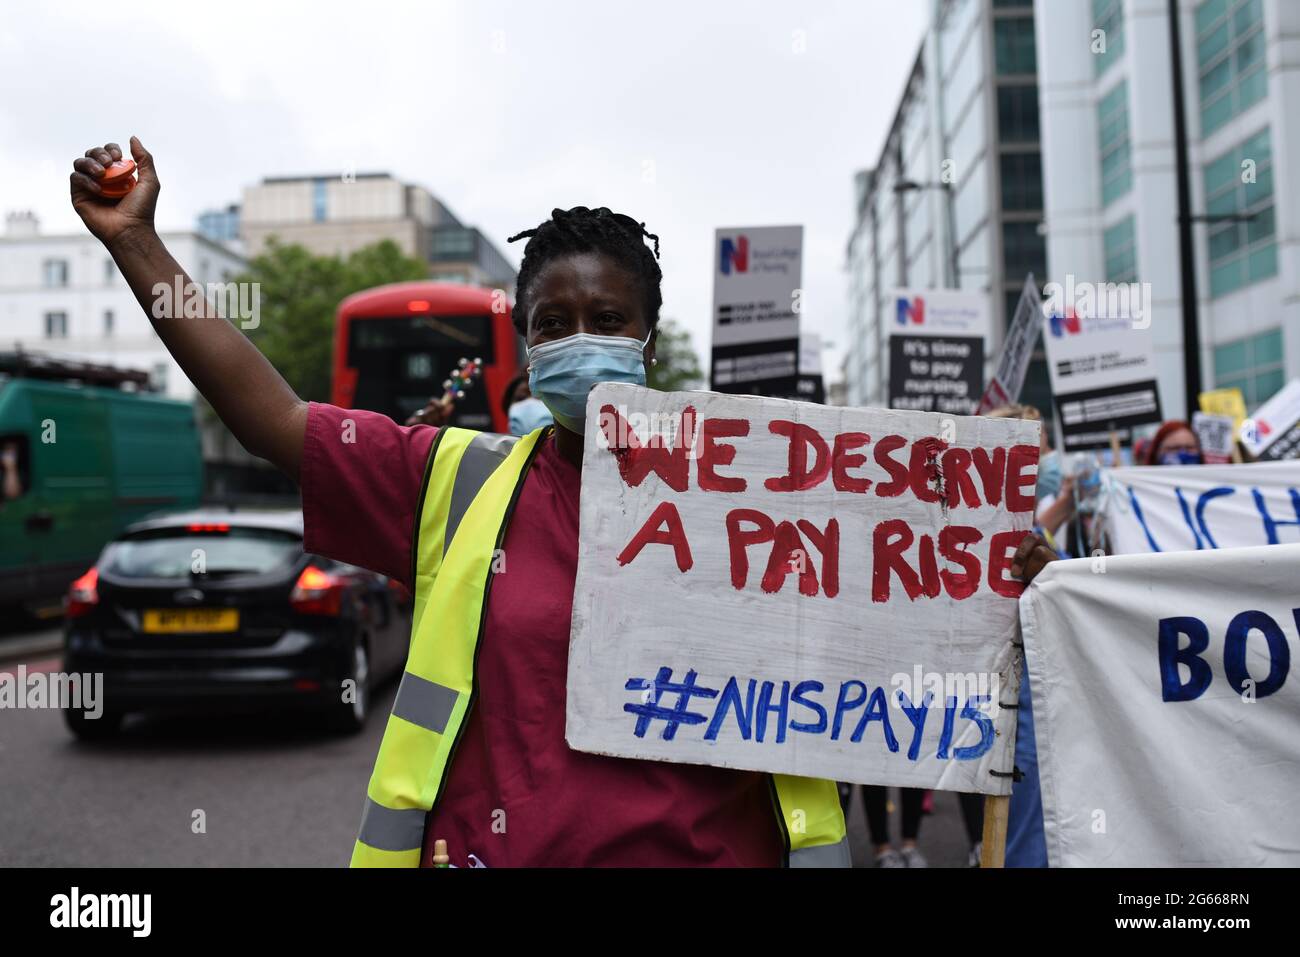 London, UK. 3 July 2021. UK nationwide NHS protest for the 73rd birthday of the NHS. Protestors march in London from UCLH to Parliament Square to demand patient safety, pay justice and an end to privatization. Credit: Andrea Domeniconi/Alamy Live News Stock Photo